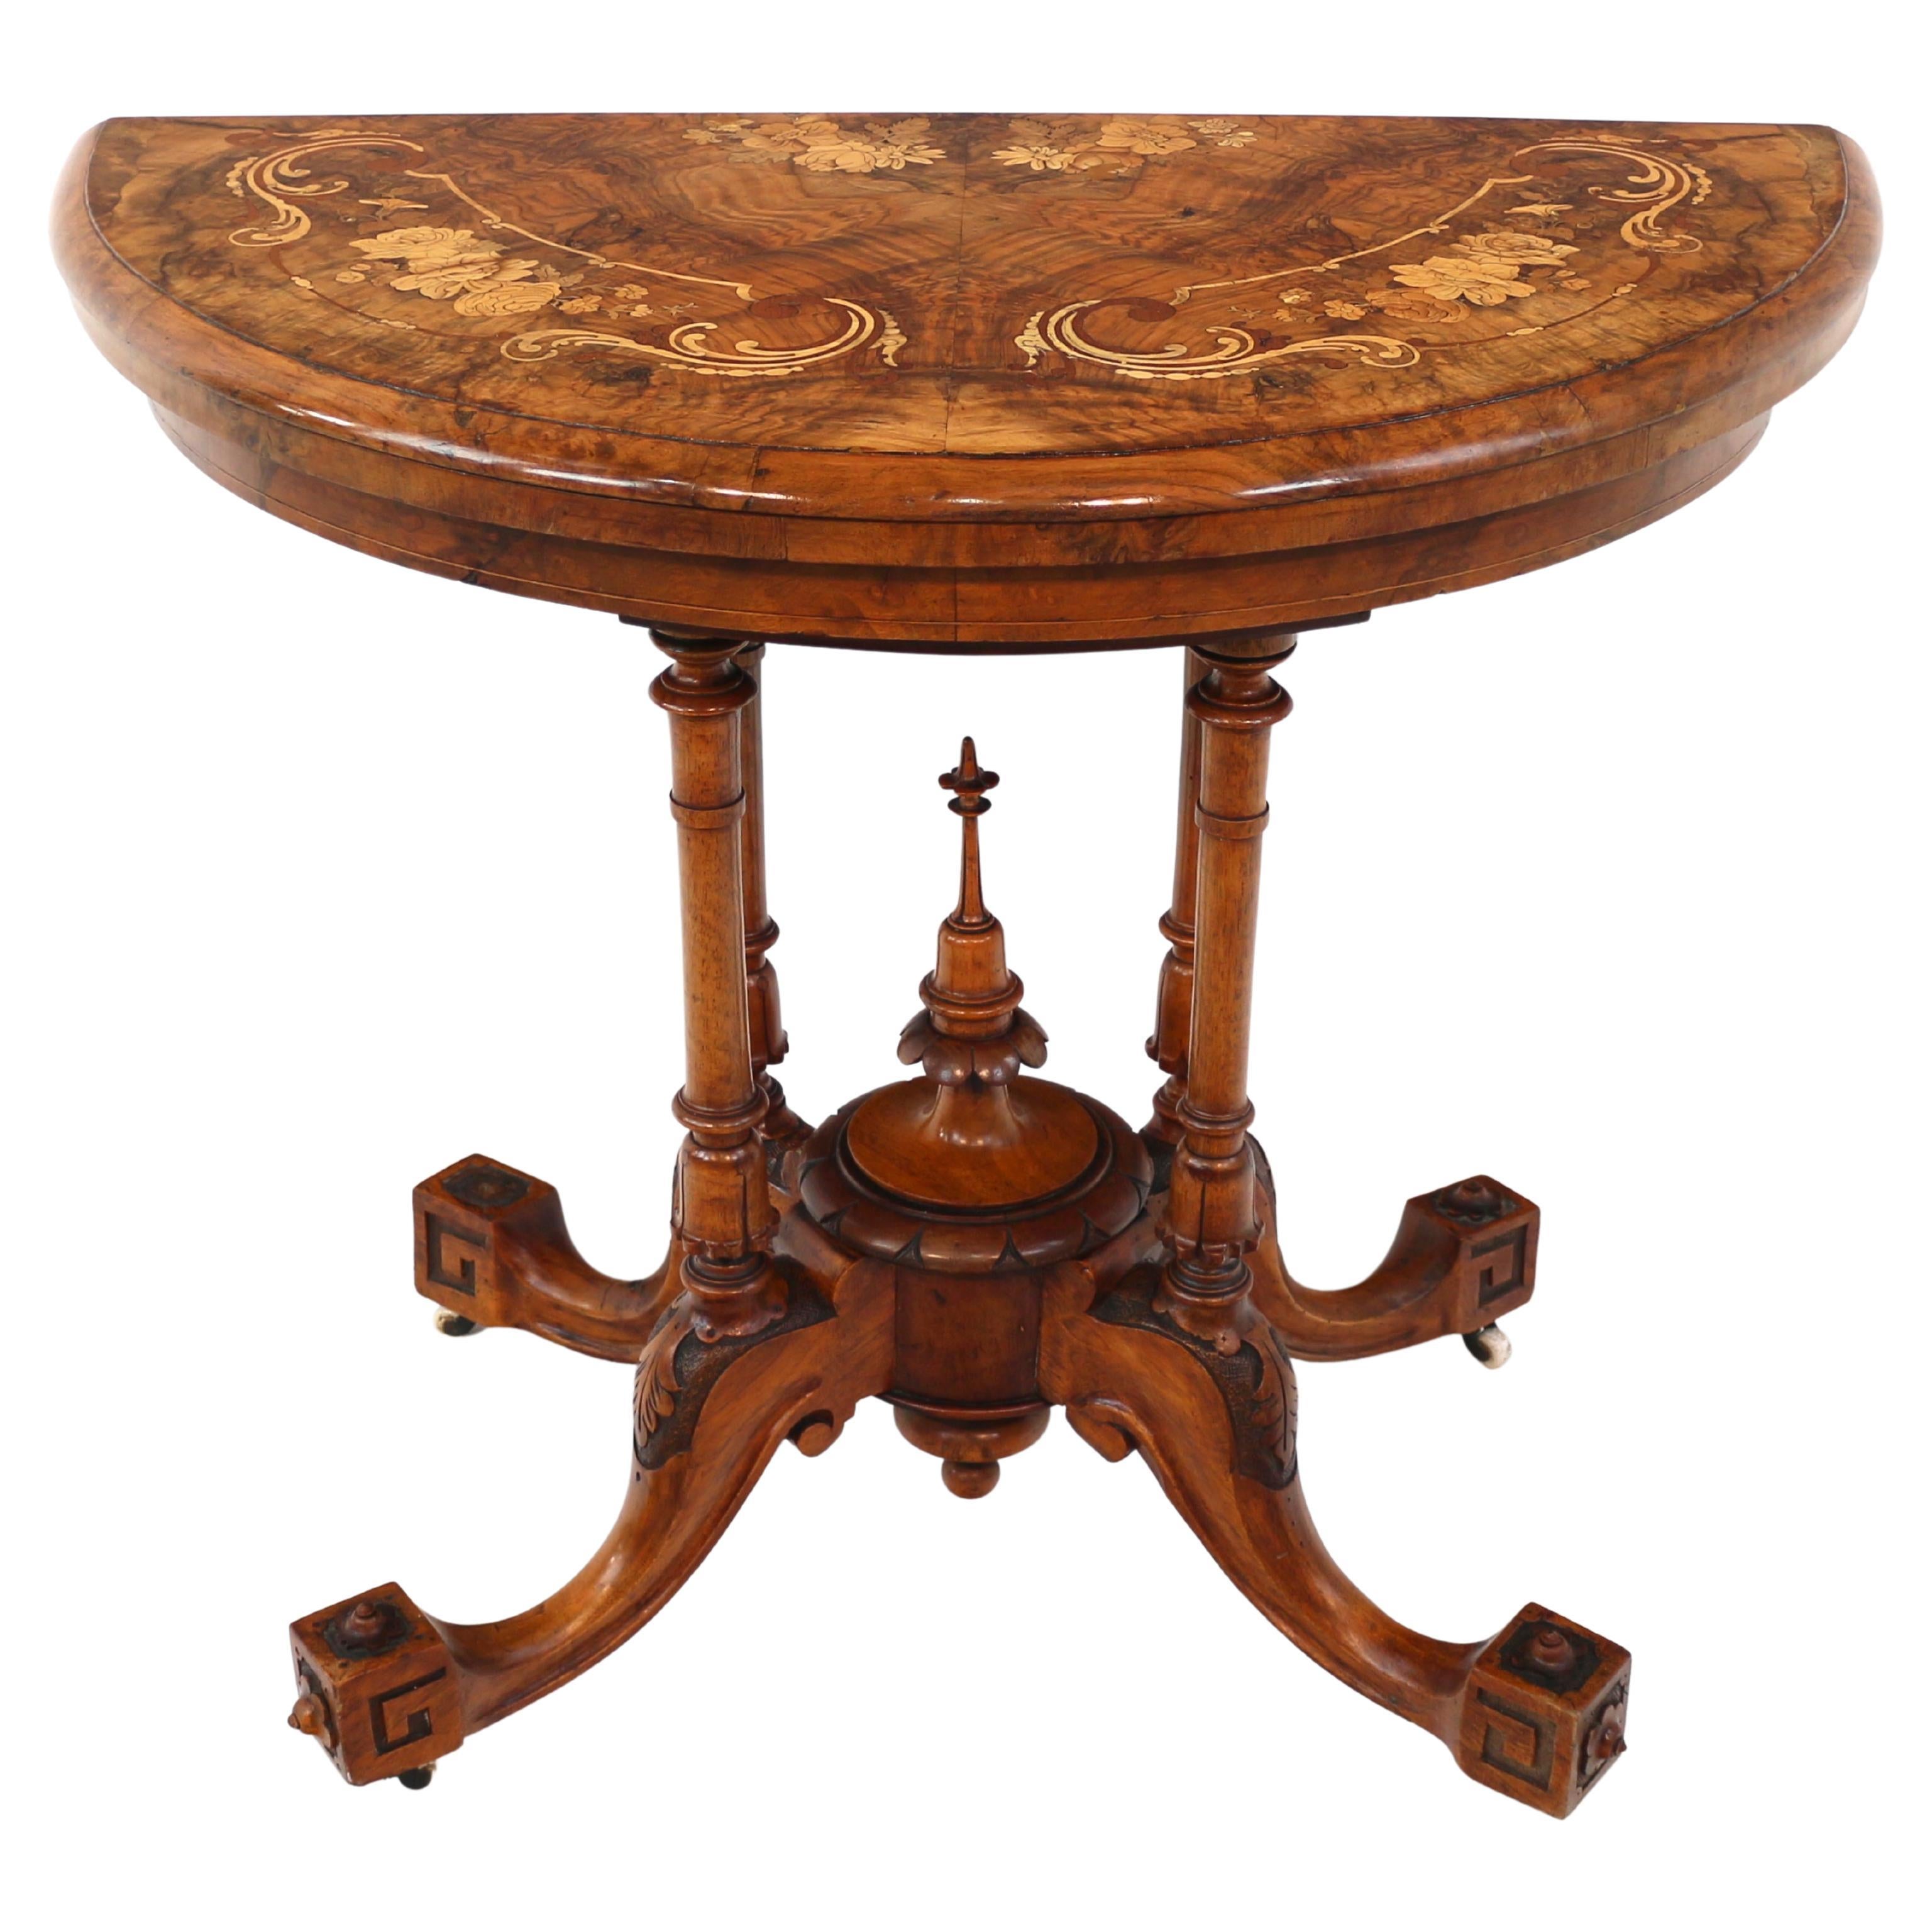 Antique English Victorian Burr Walnut & Floral Marquetry Demi-Lune Card Table